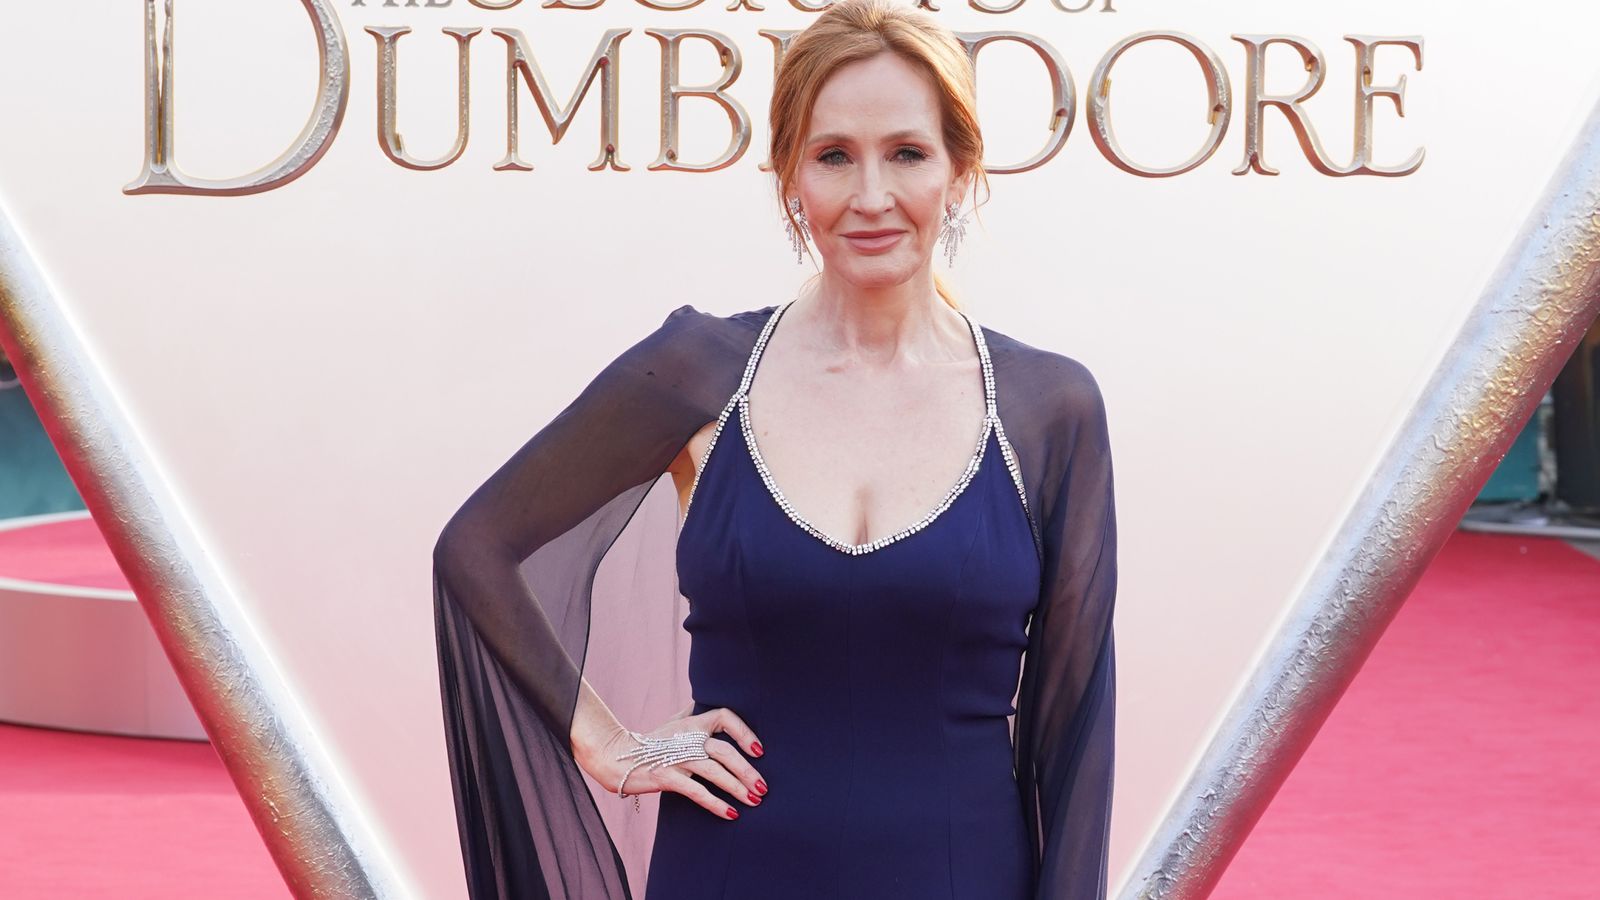 JK Rowling says she knew views on transgender issues would make Harry Potter fans 'deeply unhappy'